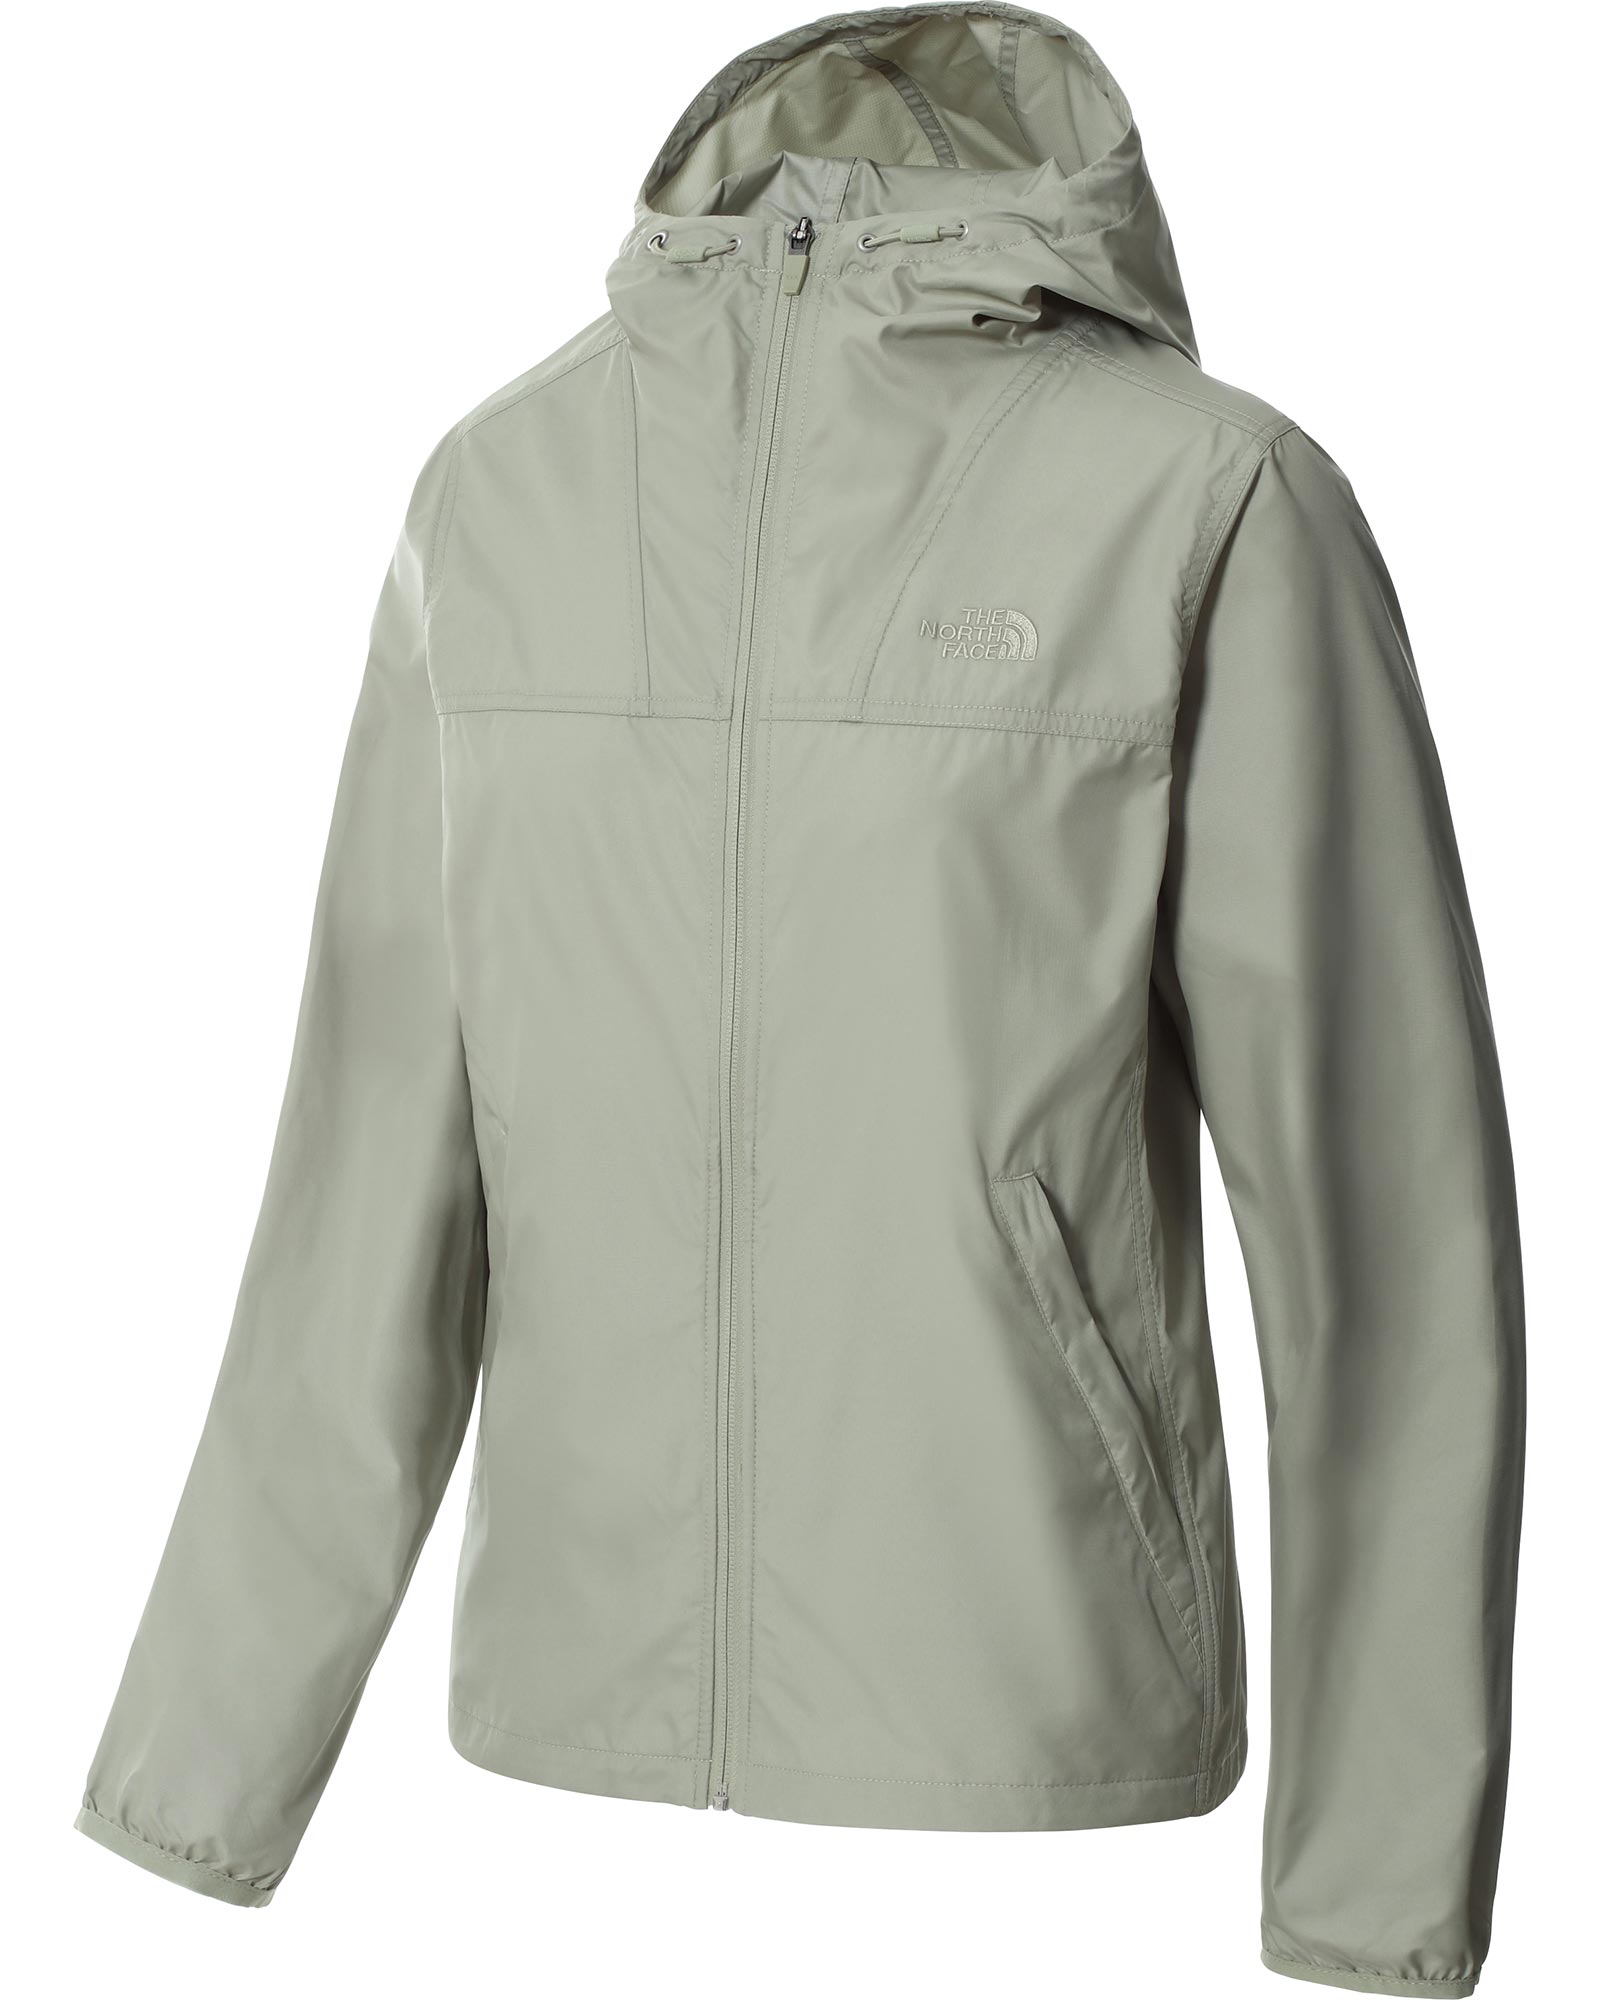 The North Face Cyclone Women’s Jacket - Tea Green XS